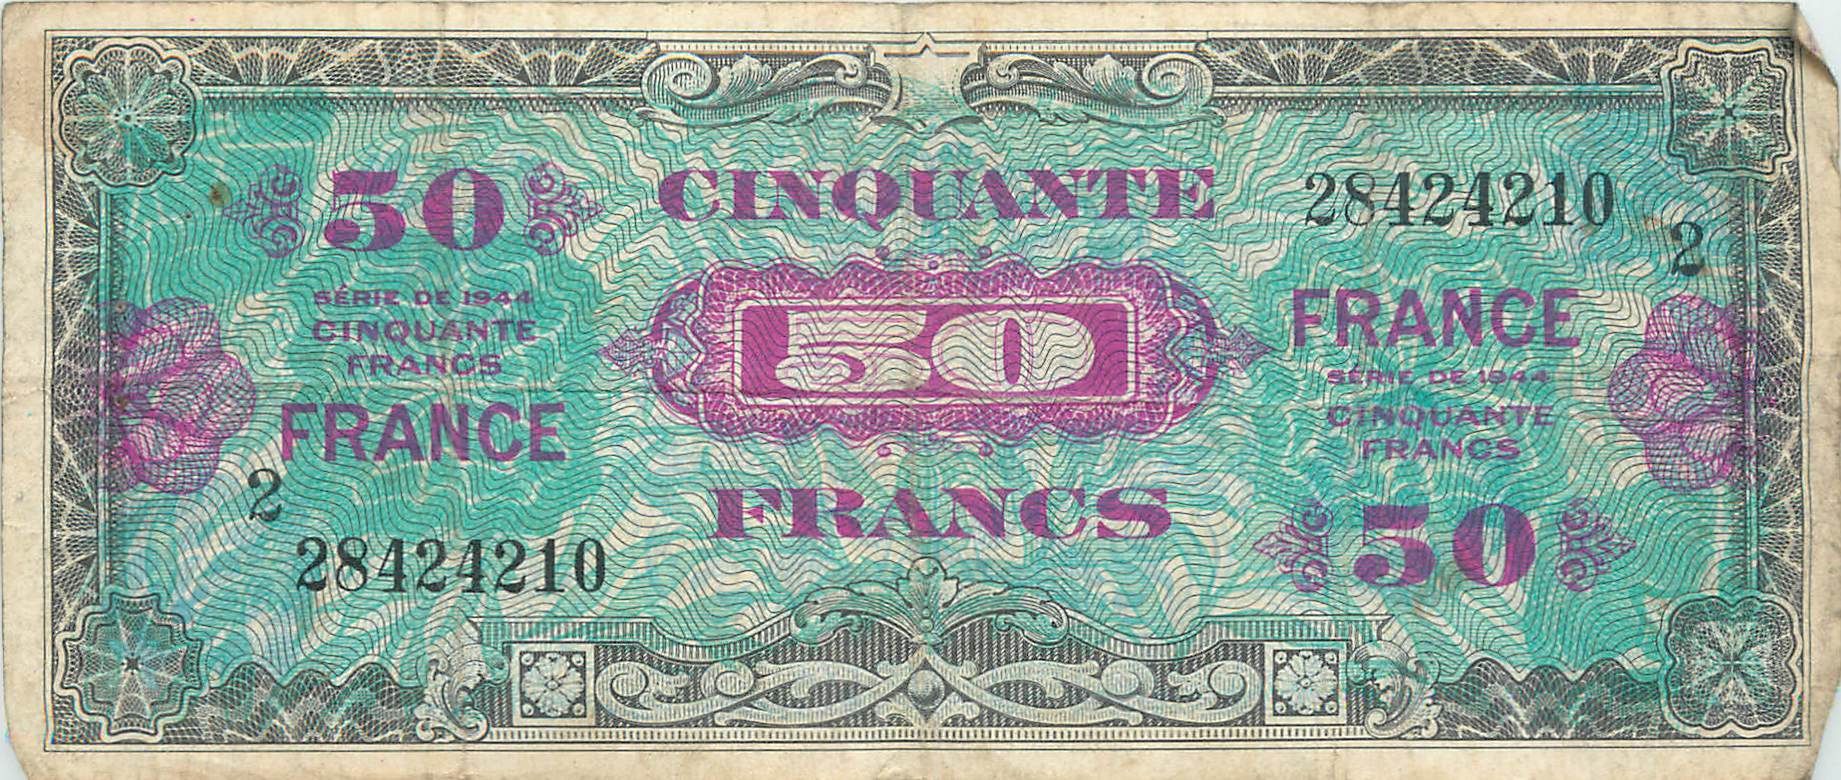 Null Set of 14 Banknotes - France & Foreigners.

2-France : 50 Francs series of &hellip;